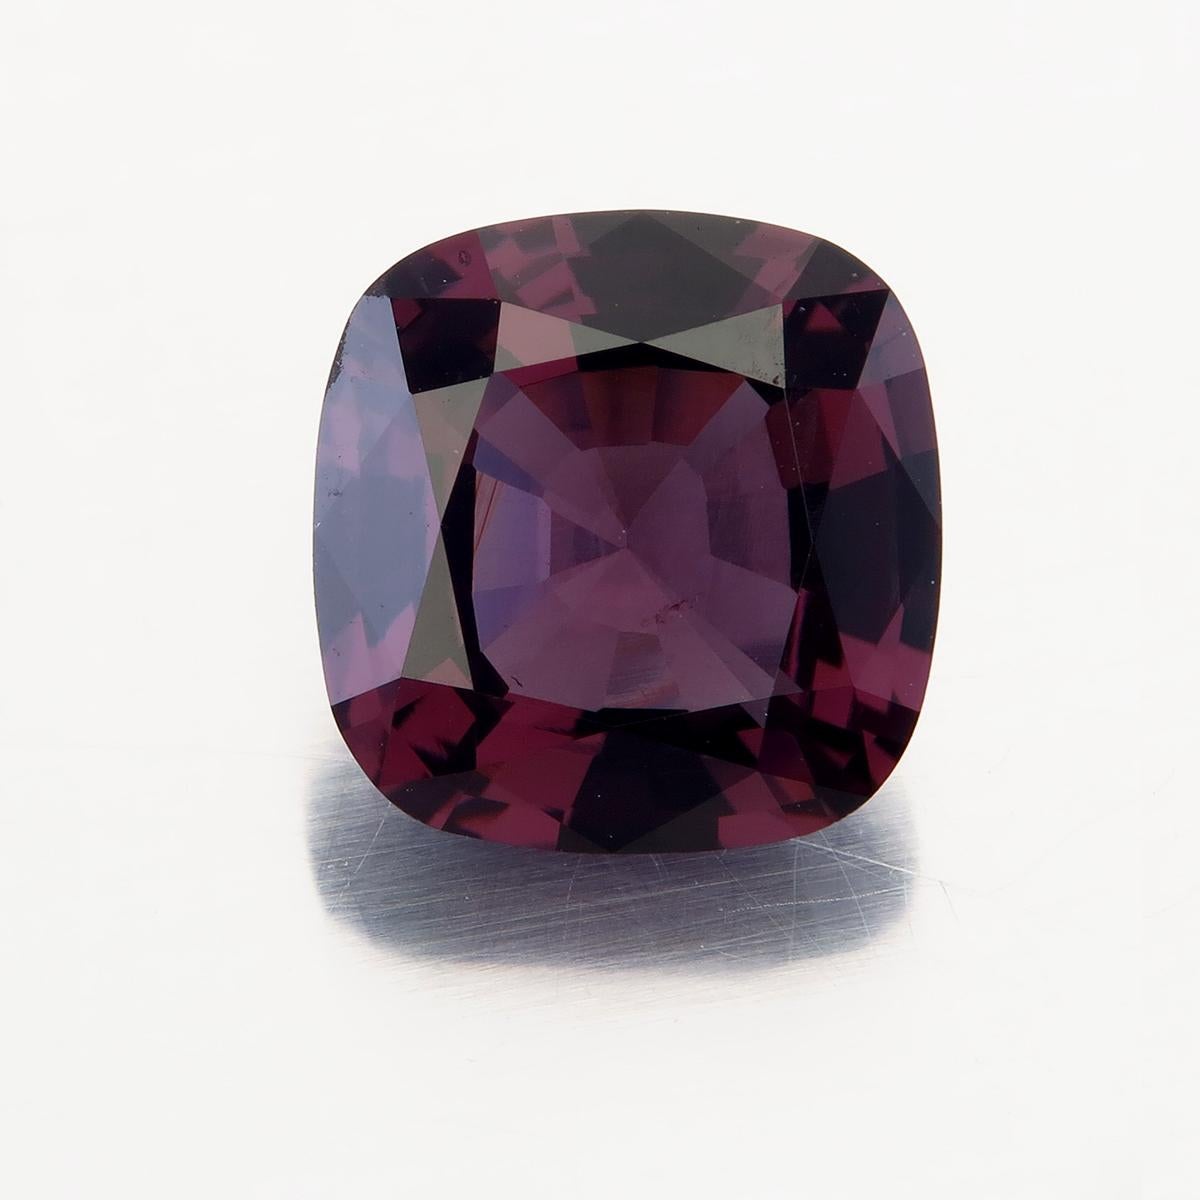 3.33 Carat Purplish Red  Spinel from Sri Lanka know in the past variously as Serendib or the 